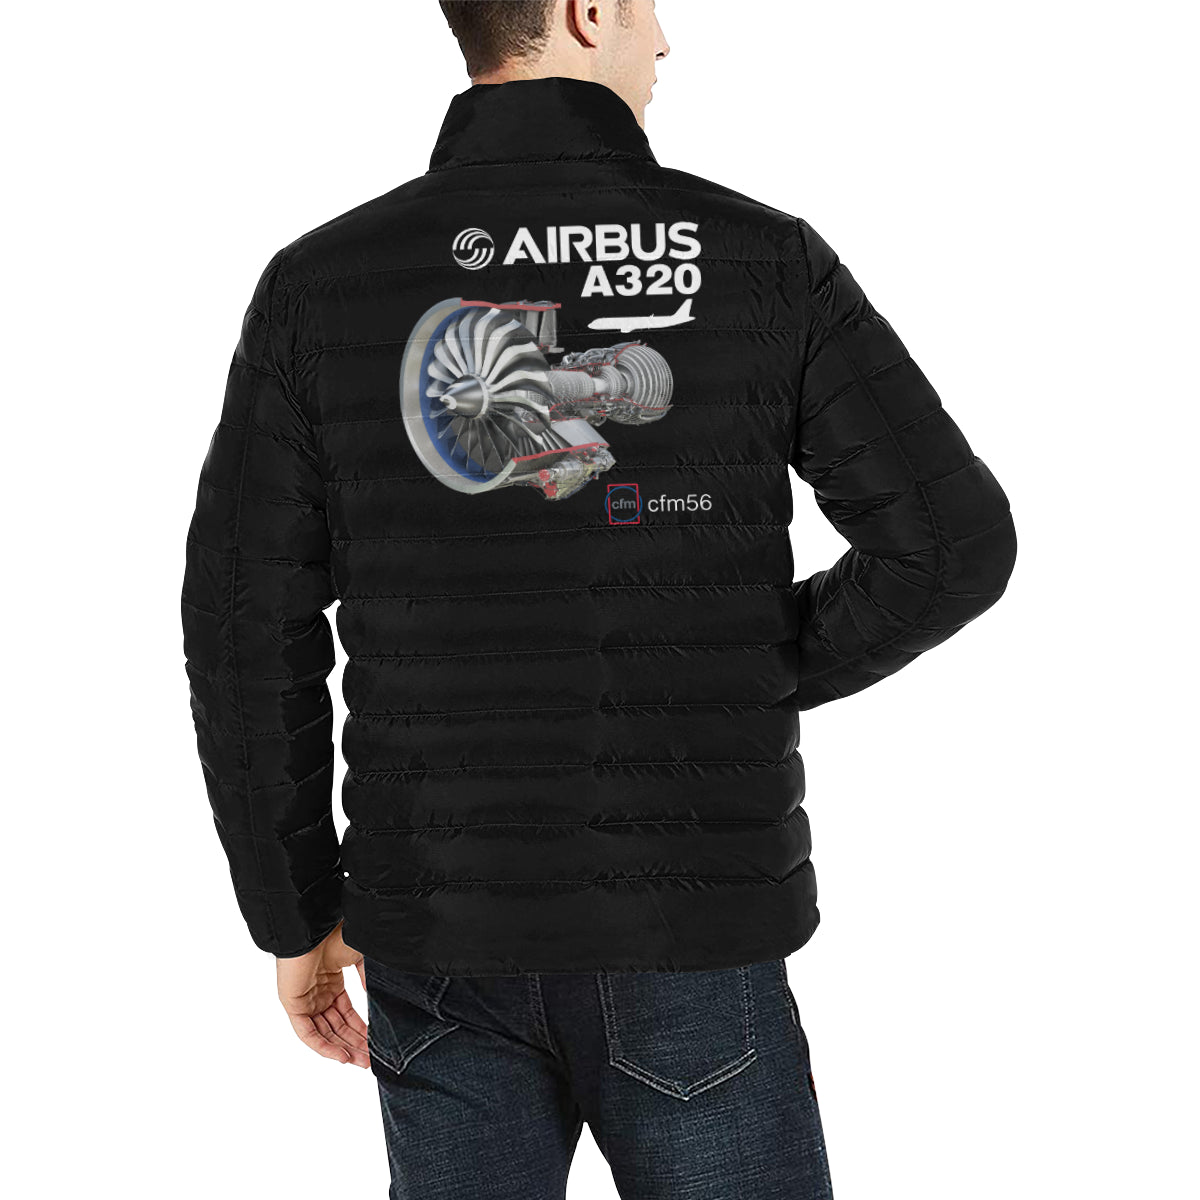 Airbus A320 Men's Stand Collar Padded Jacket e-joyer